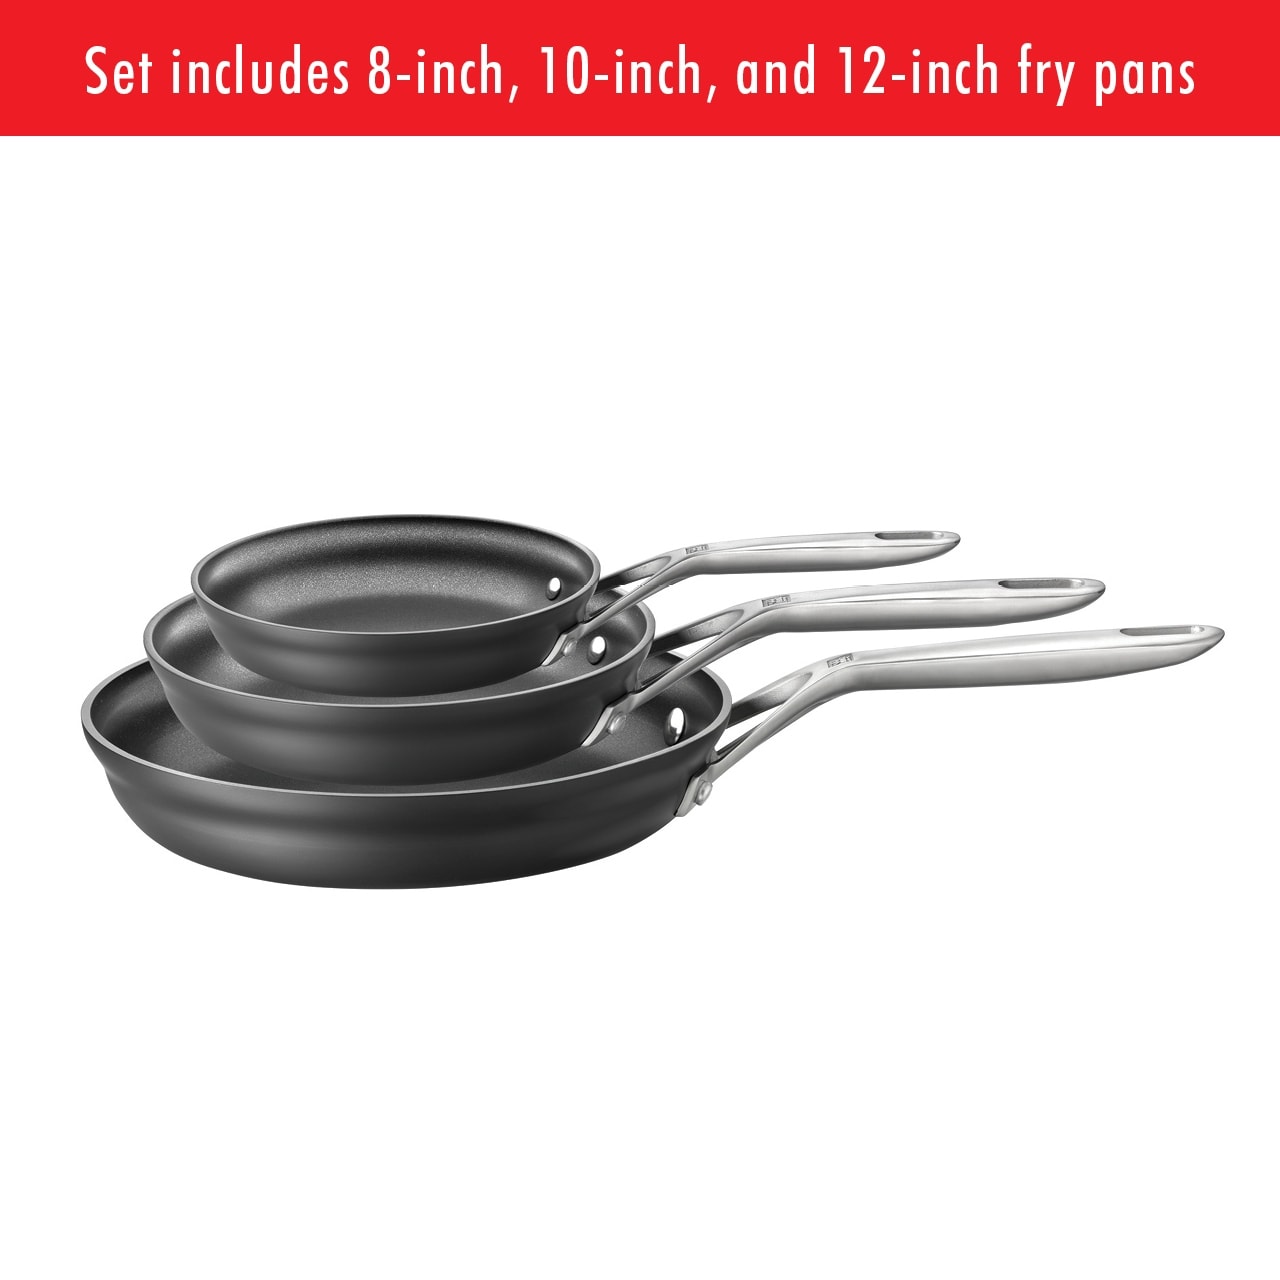 https://ak1.ostkcdn.com/images/products/is/images/direct/d9a2bee1bedbecaee13678012417220cbfad5dc0/ZWILLING-Motion-Hard-Anodized-Aluminum-Nonstick-Fry-Pan.jpg